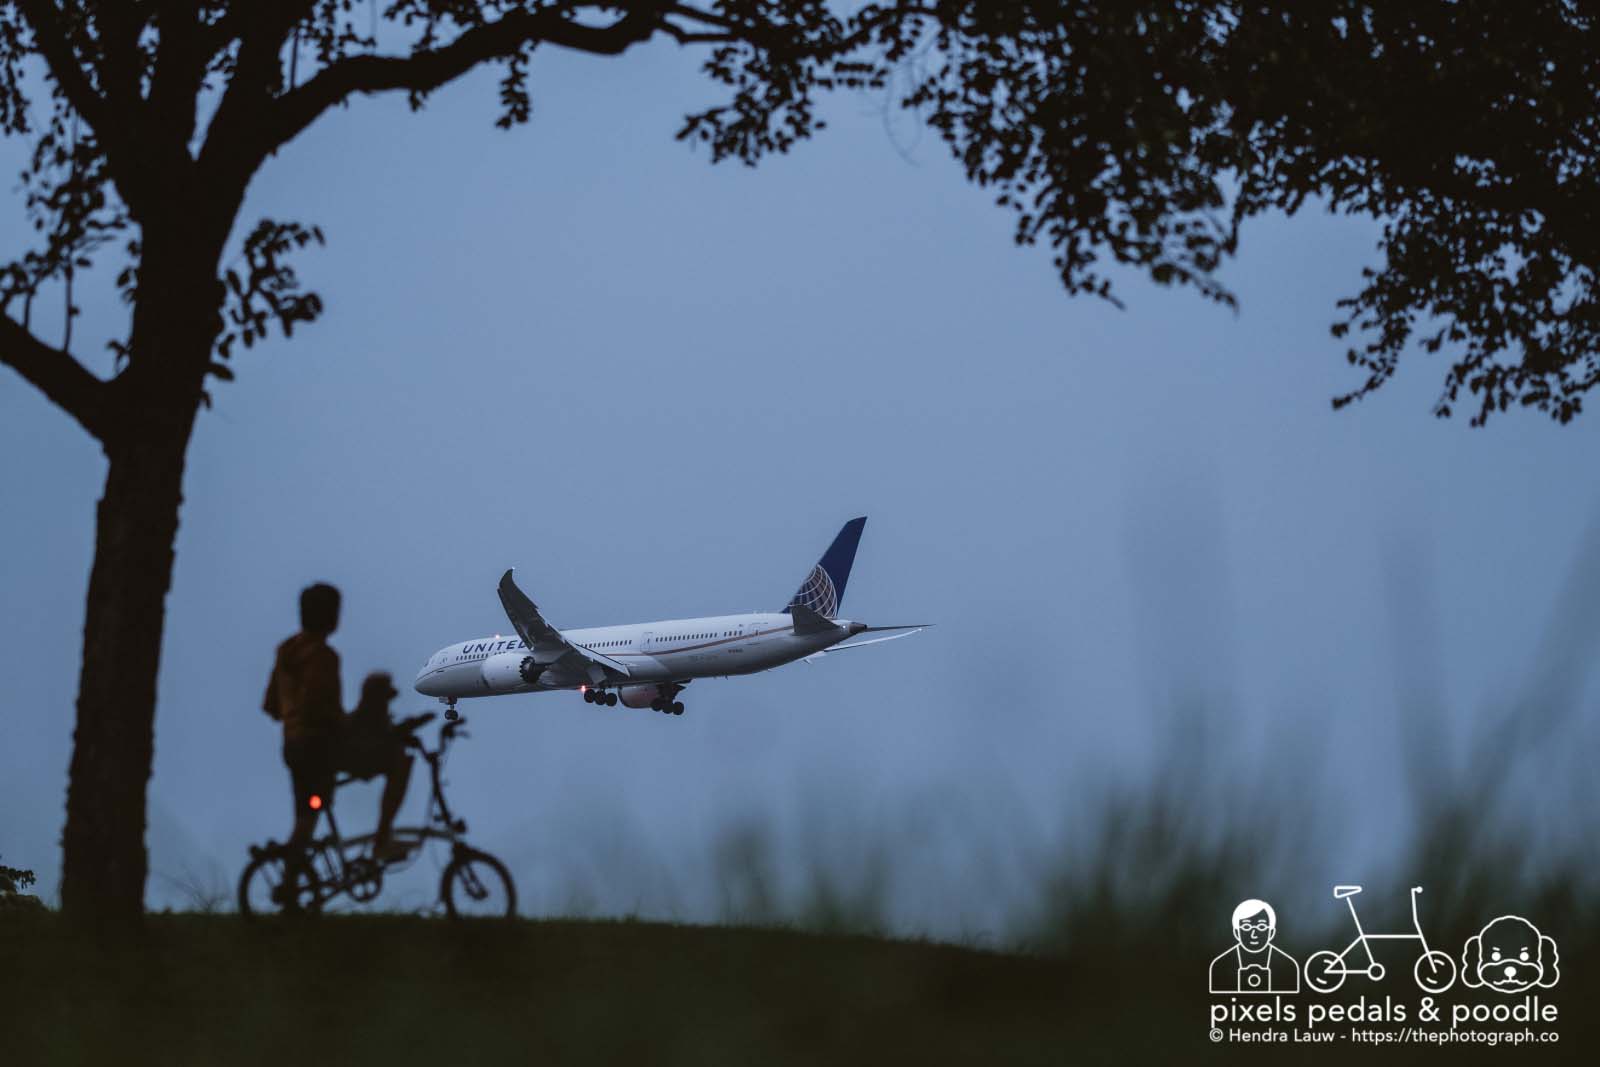 Plane Spotting United Airlines N15969 approaching Changi Airport from San Francisco